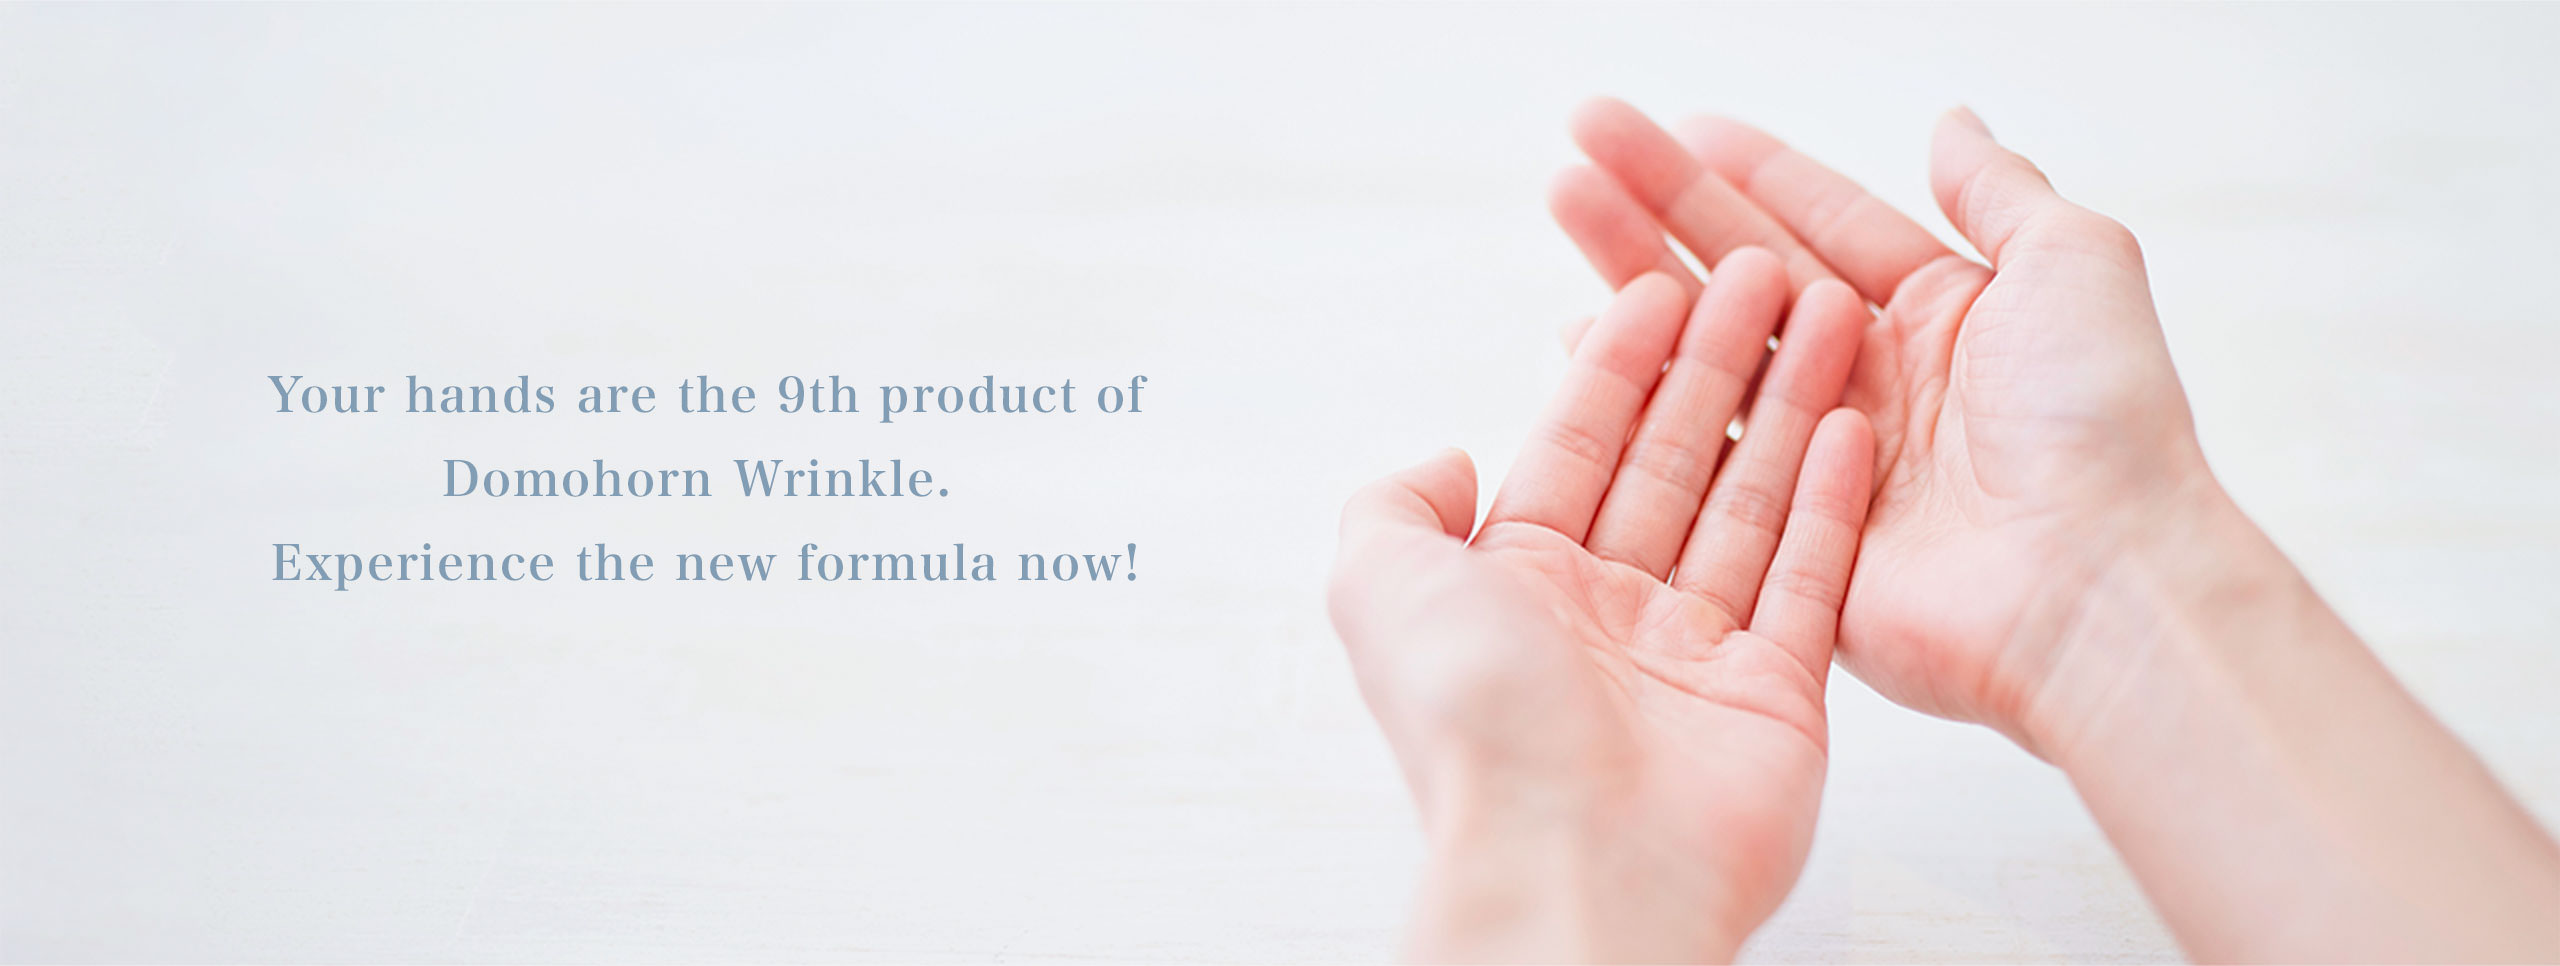 Your hands are the 9th product of Domohorn Wrinkle. Experience the new formula now!